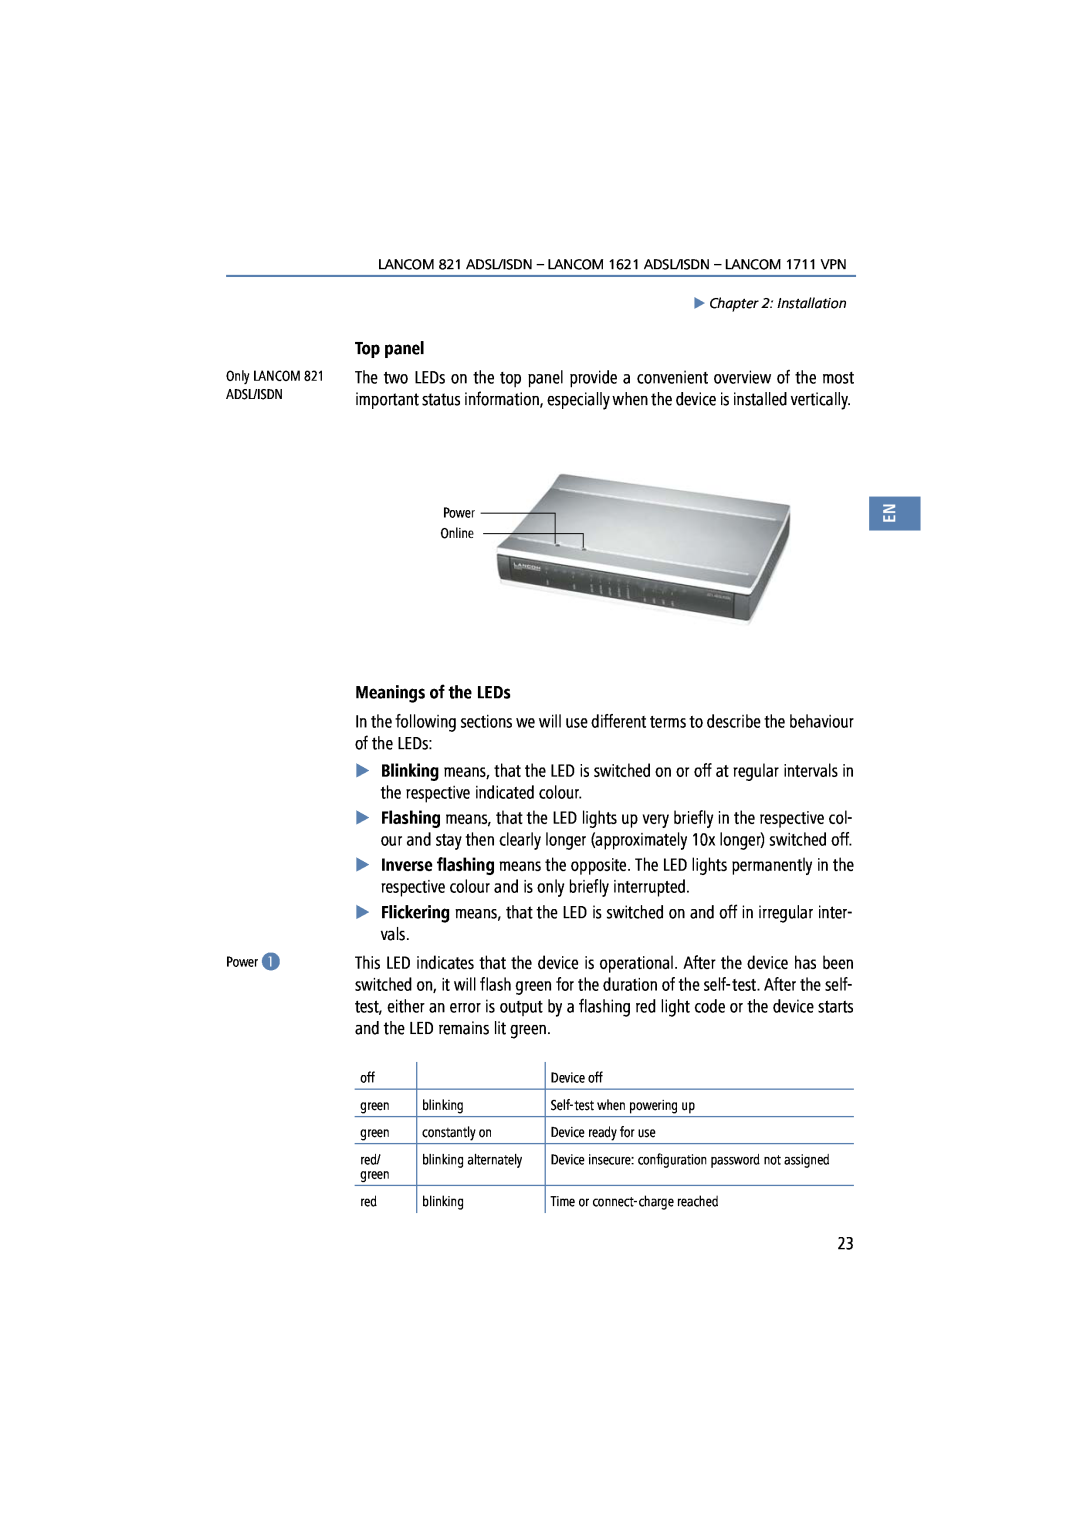 Lancom Systems 1621, 821, 1711 manual Top panel, Meanings of the LEDs 